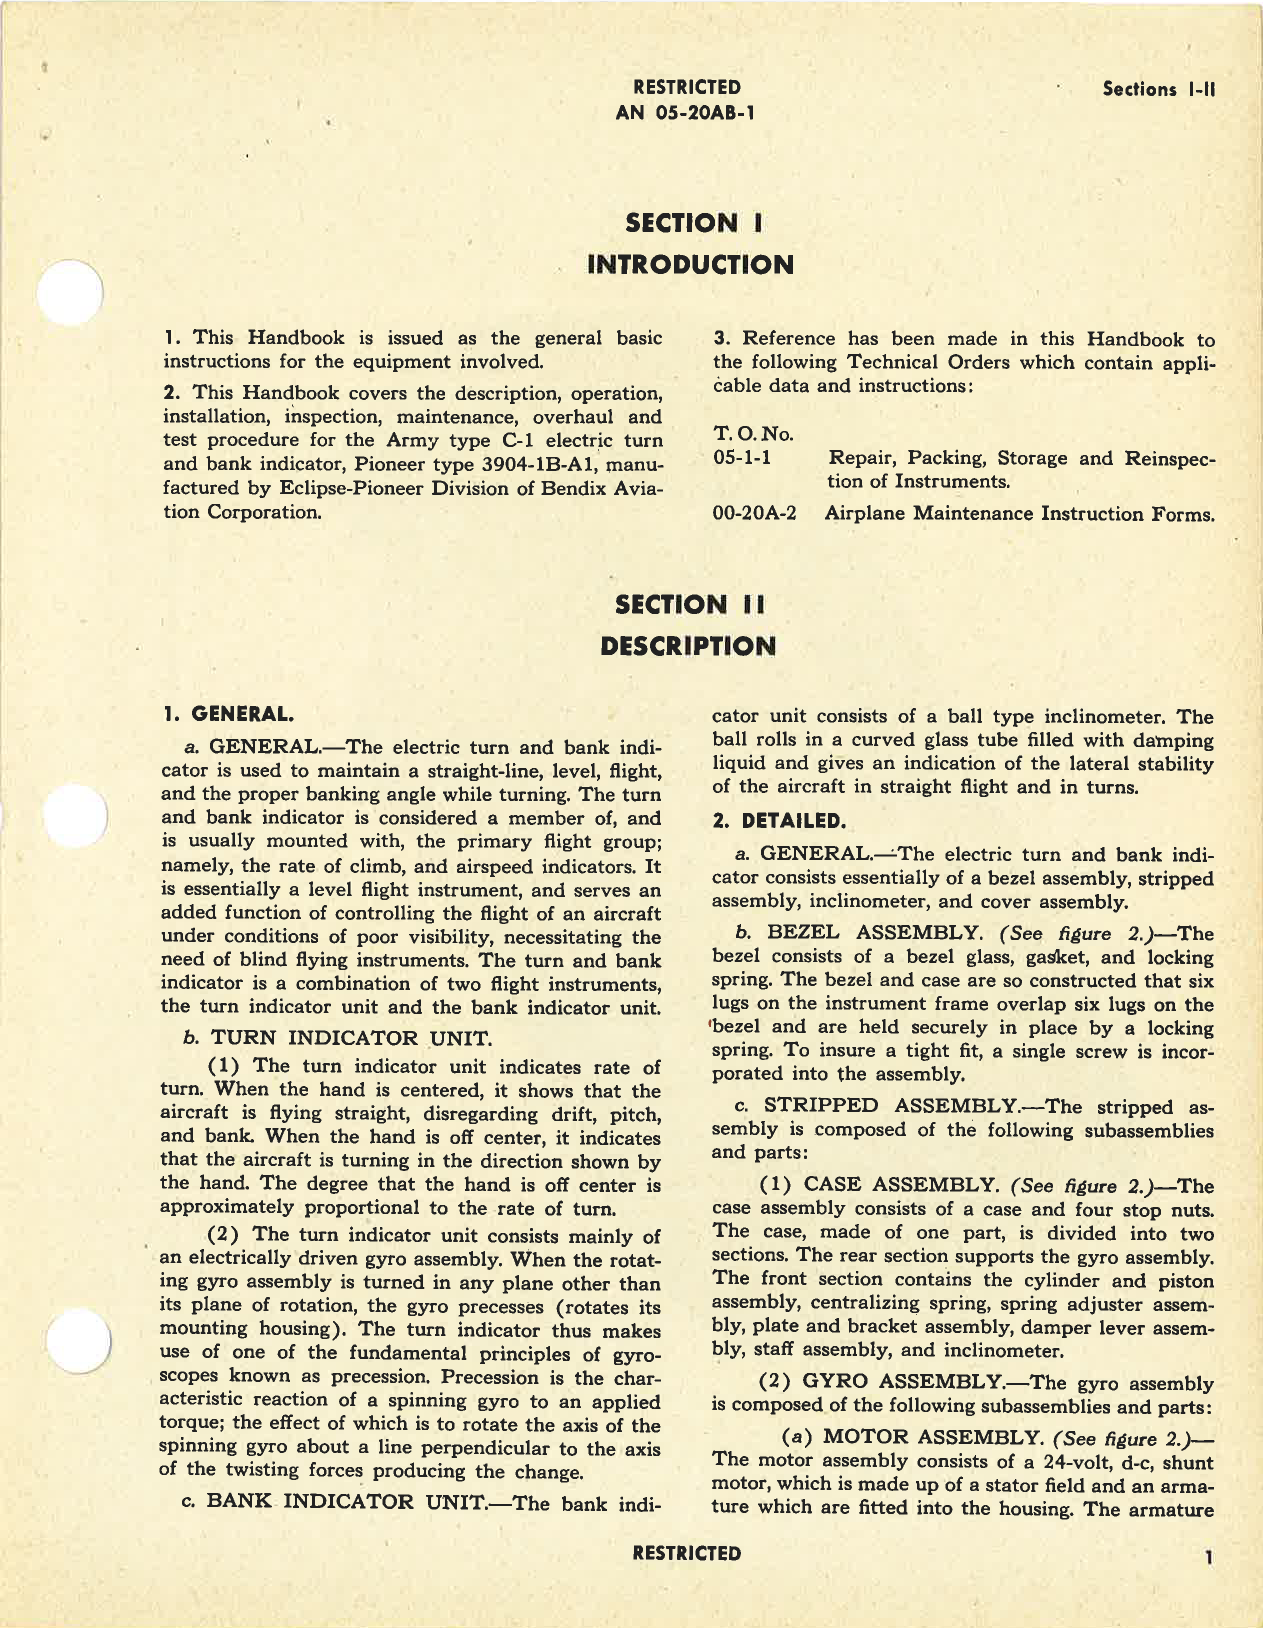 Sample page 5 from AirCorps Library document: Handbook of Instructions with Parts Catalog for C-1 Turn and Bank Indicator